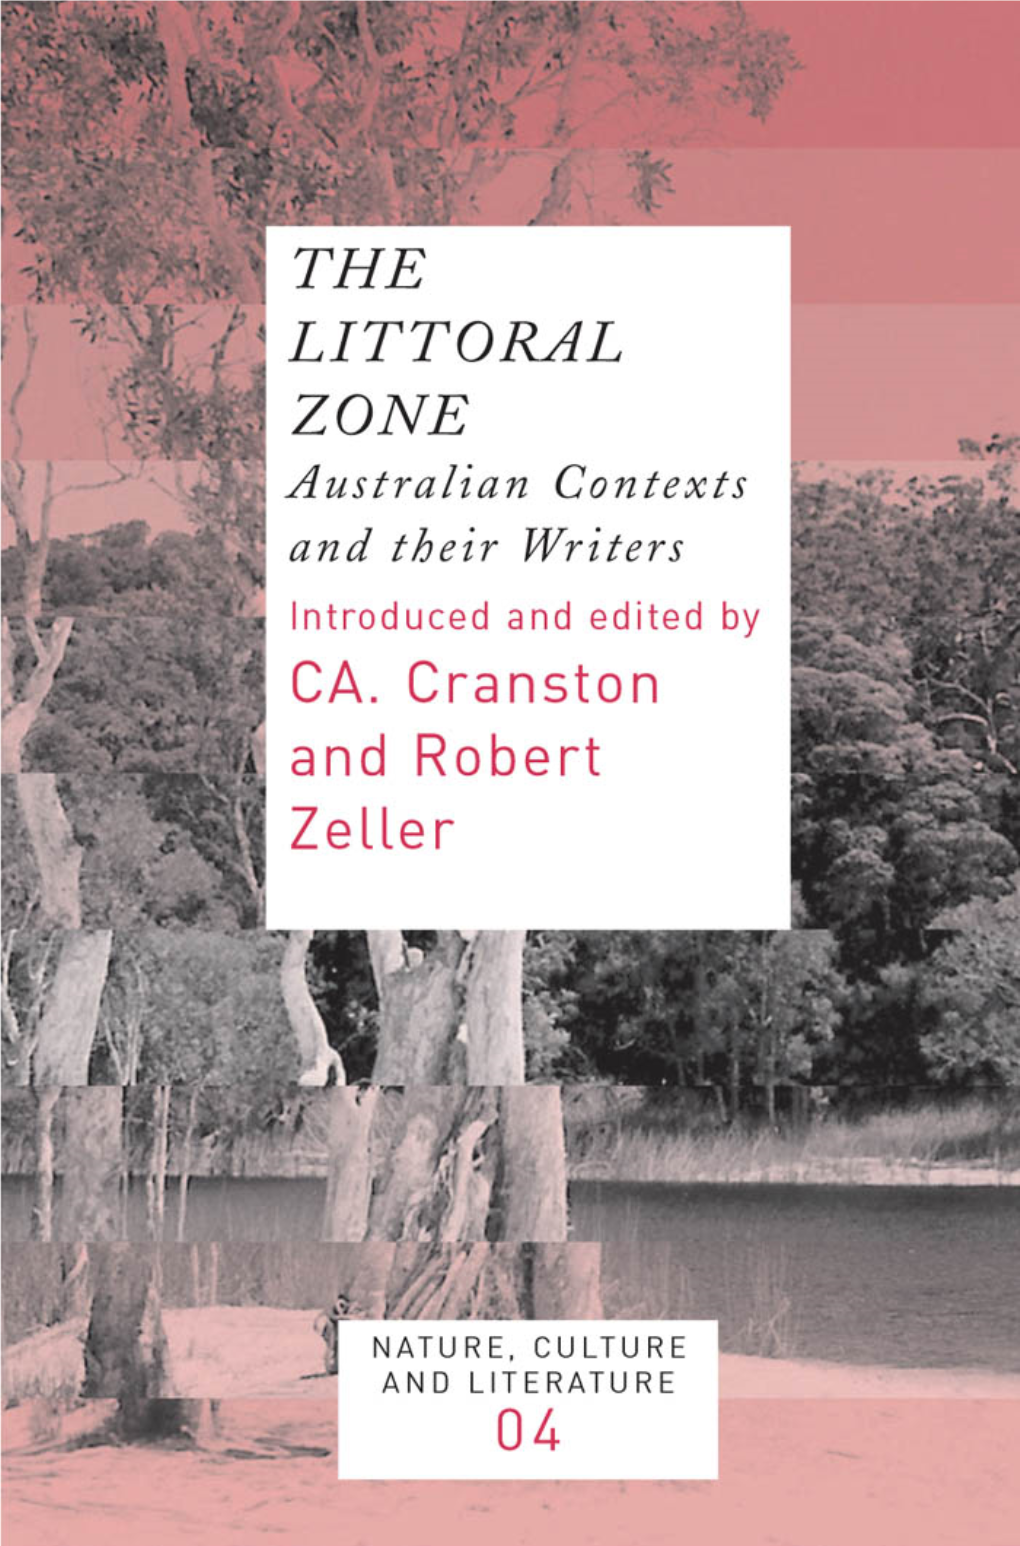 The Littoral Zone: Australian Contexts and Their Writers (Nature